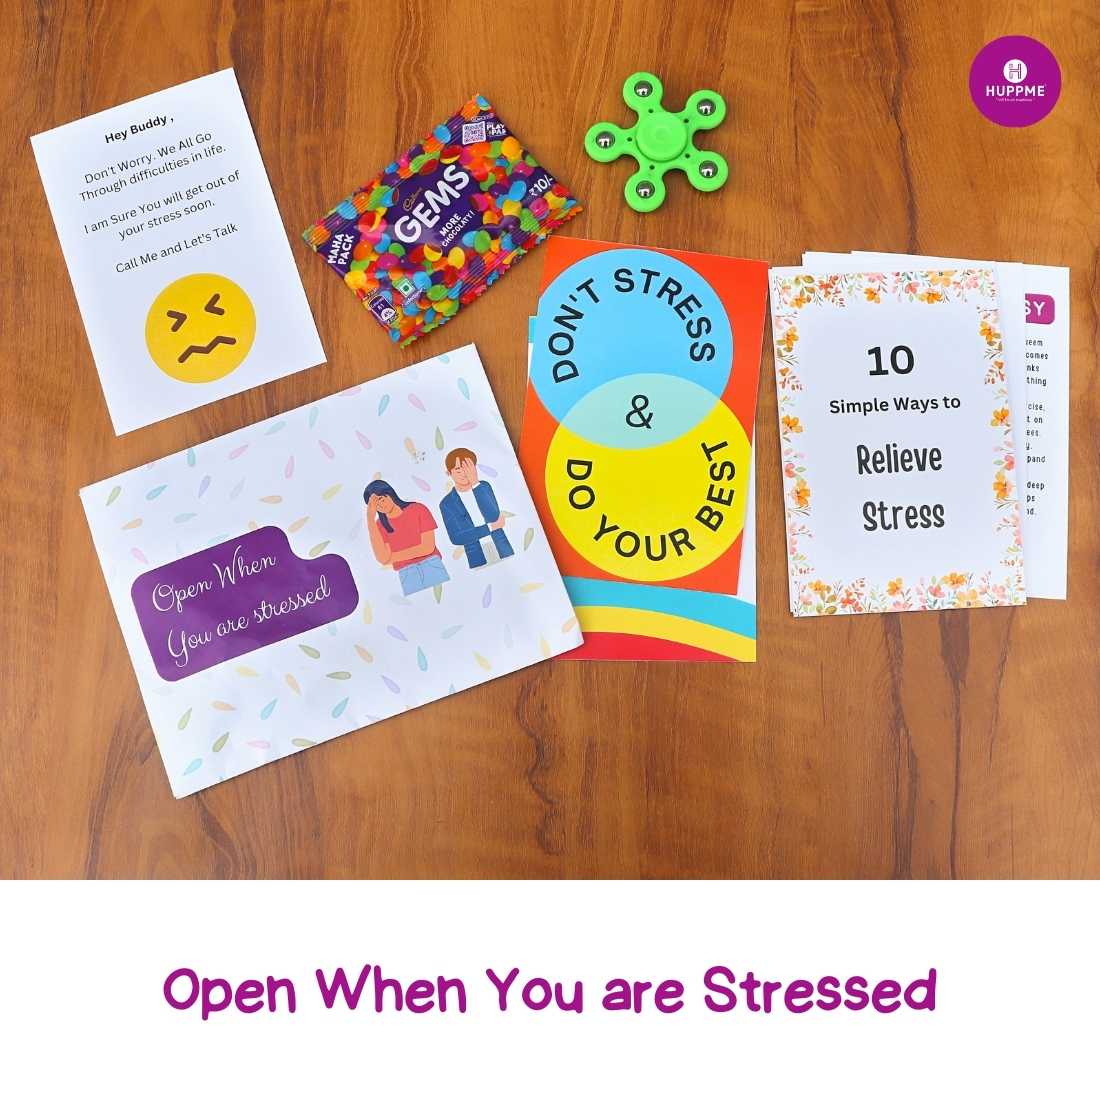 Open When You are Stressed